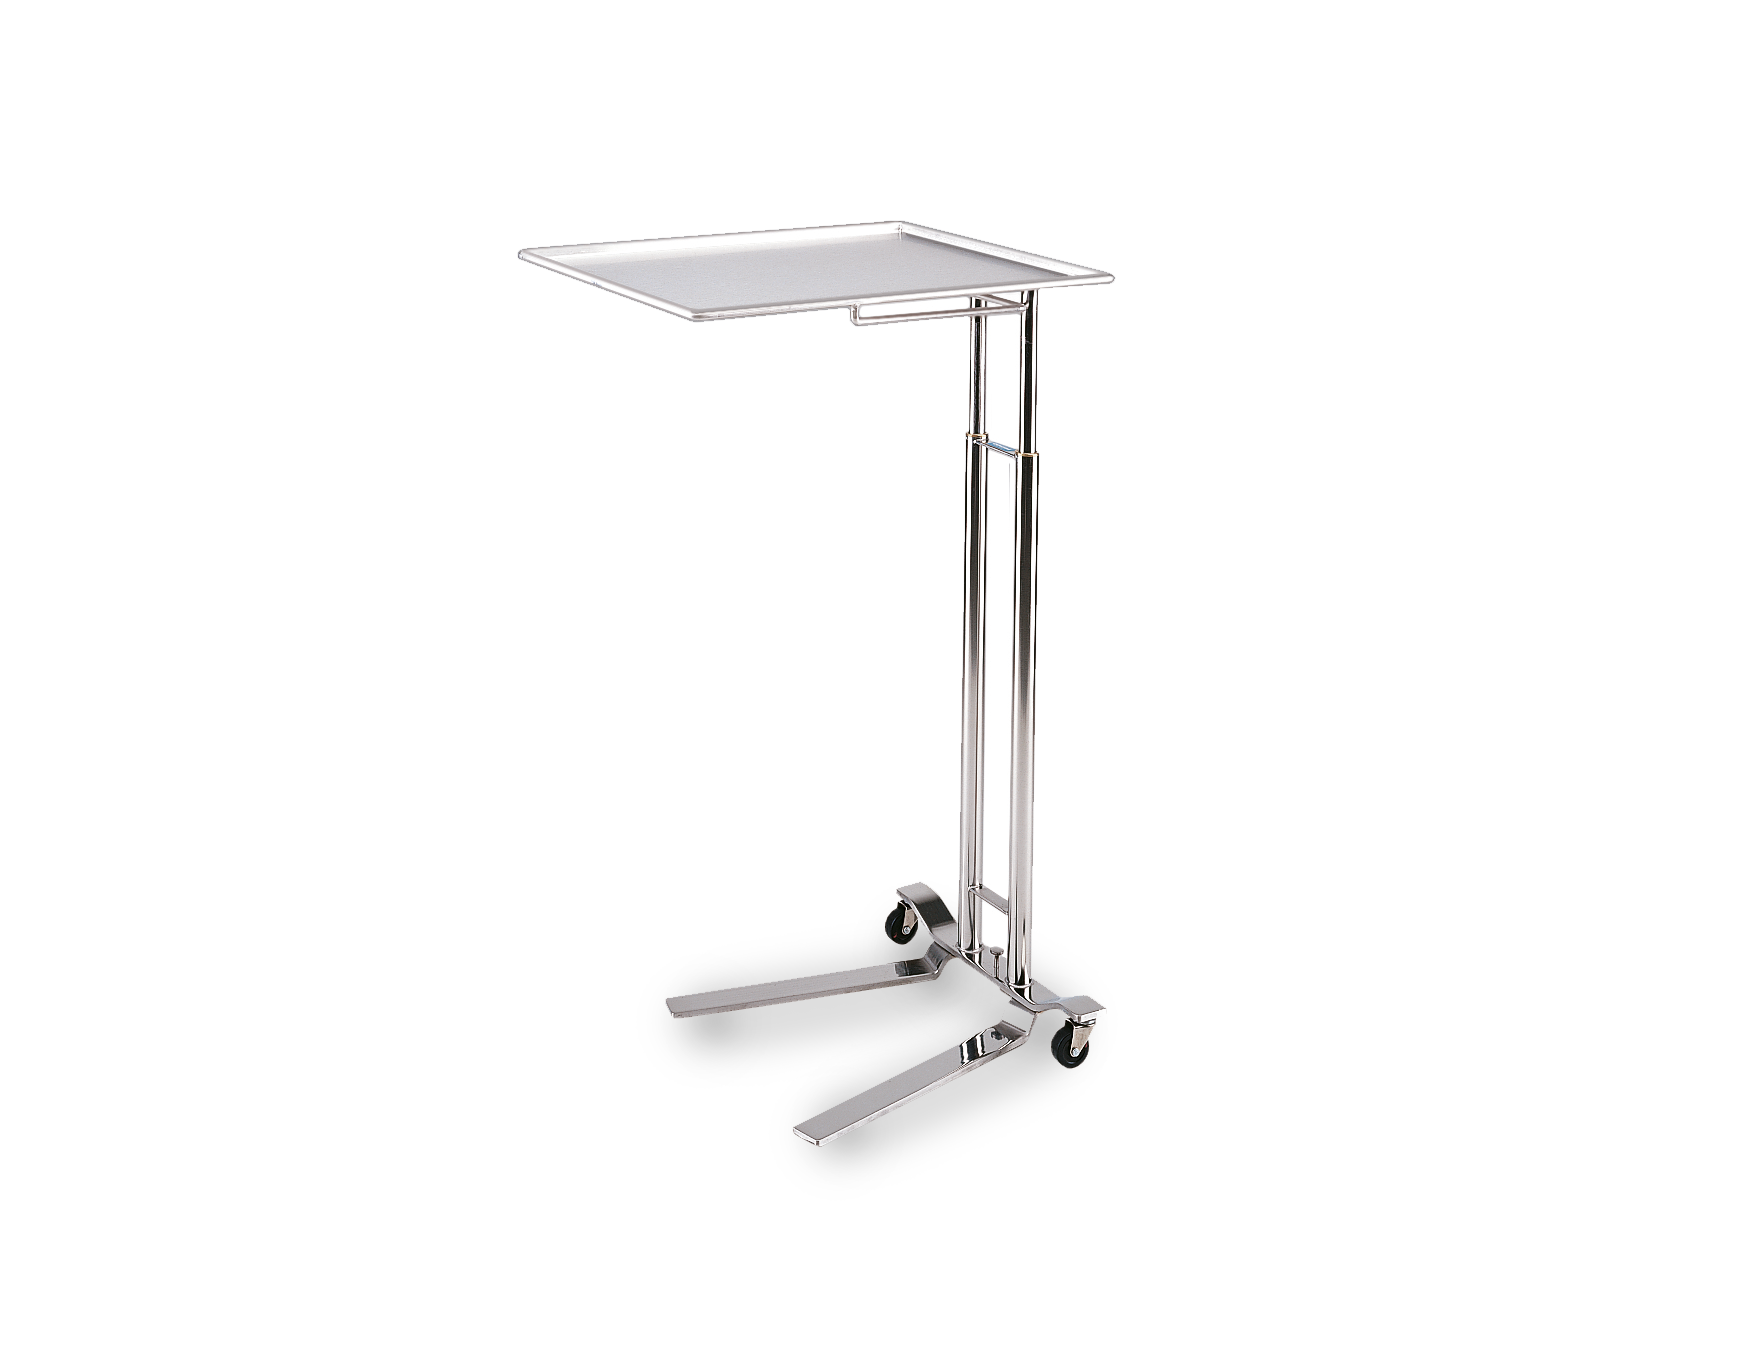 Case carts supply clean surgical instruments - surgical cart stand